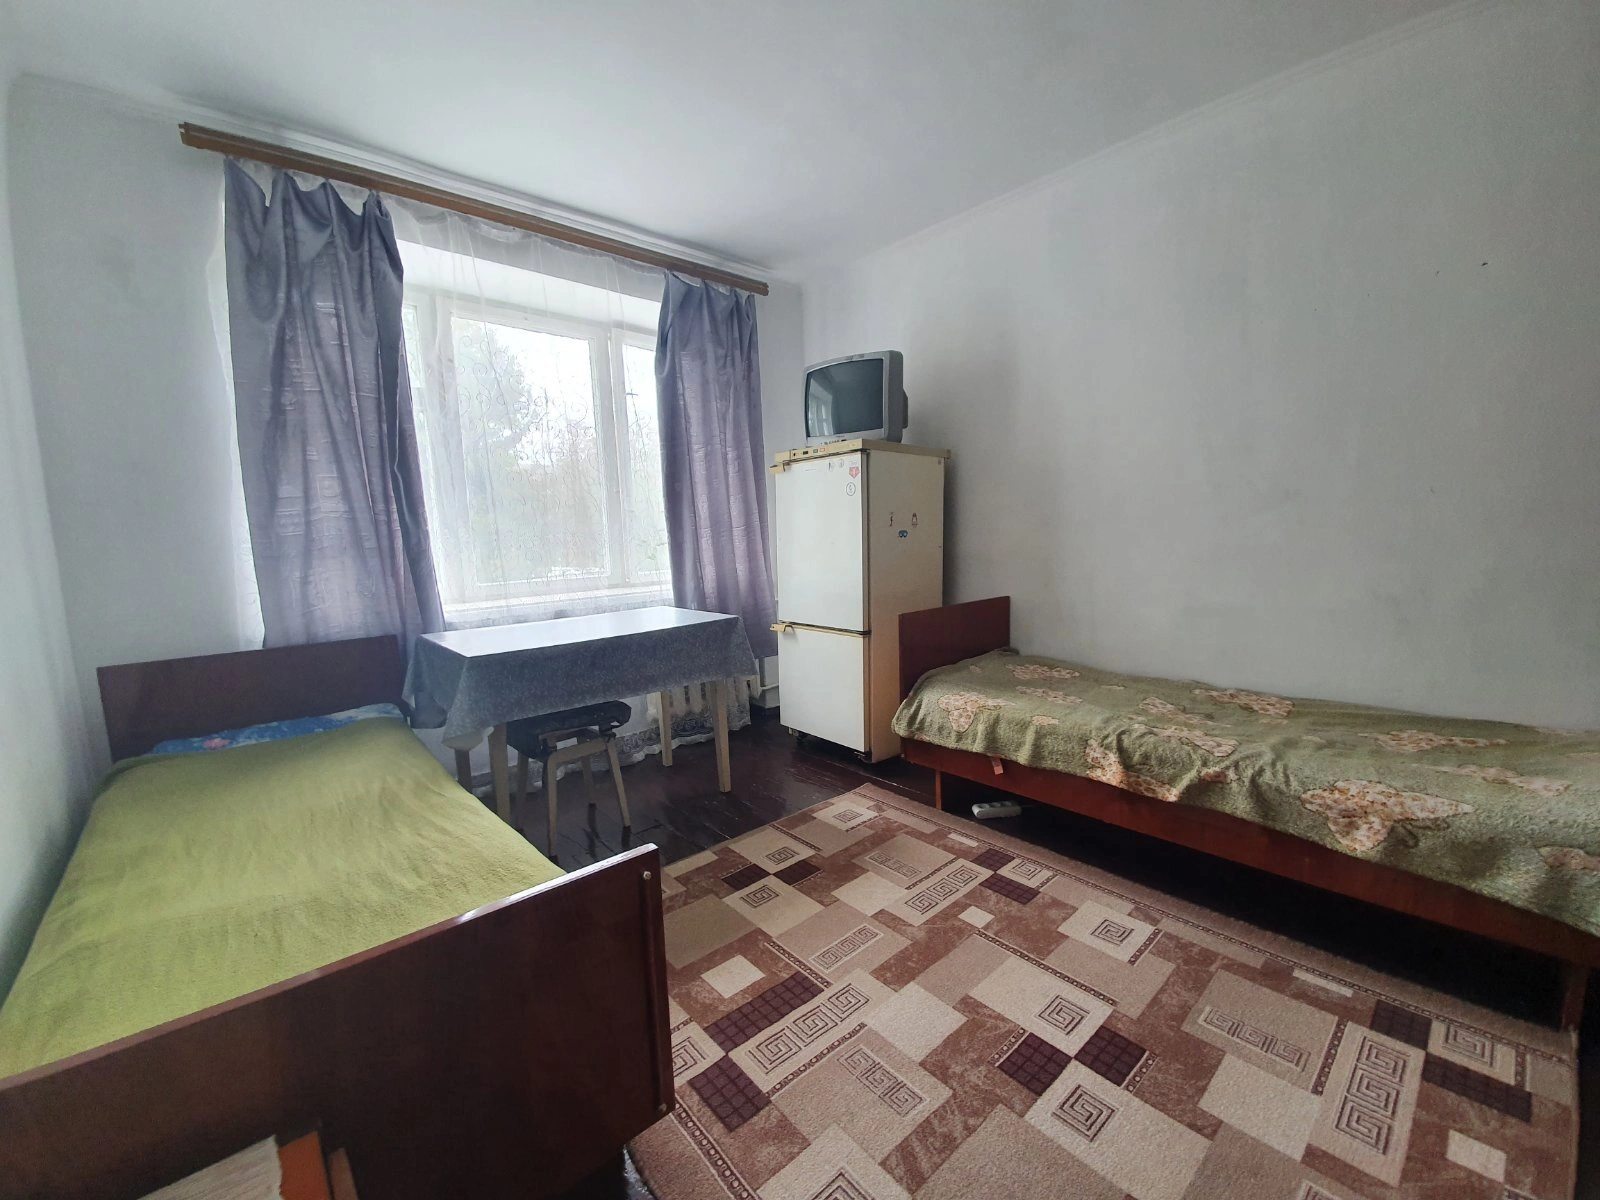 Room for rent for a long time. 1 room, 13 m², 3rd floor/4 floors. Bandery S. vul., Ternopil. 